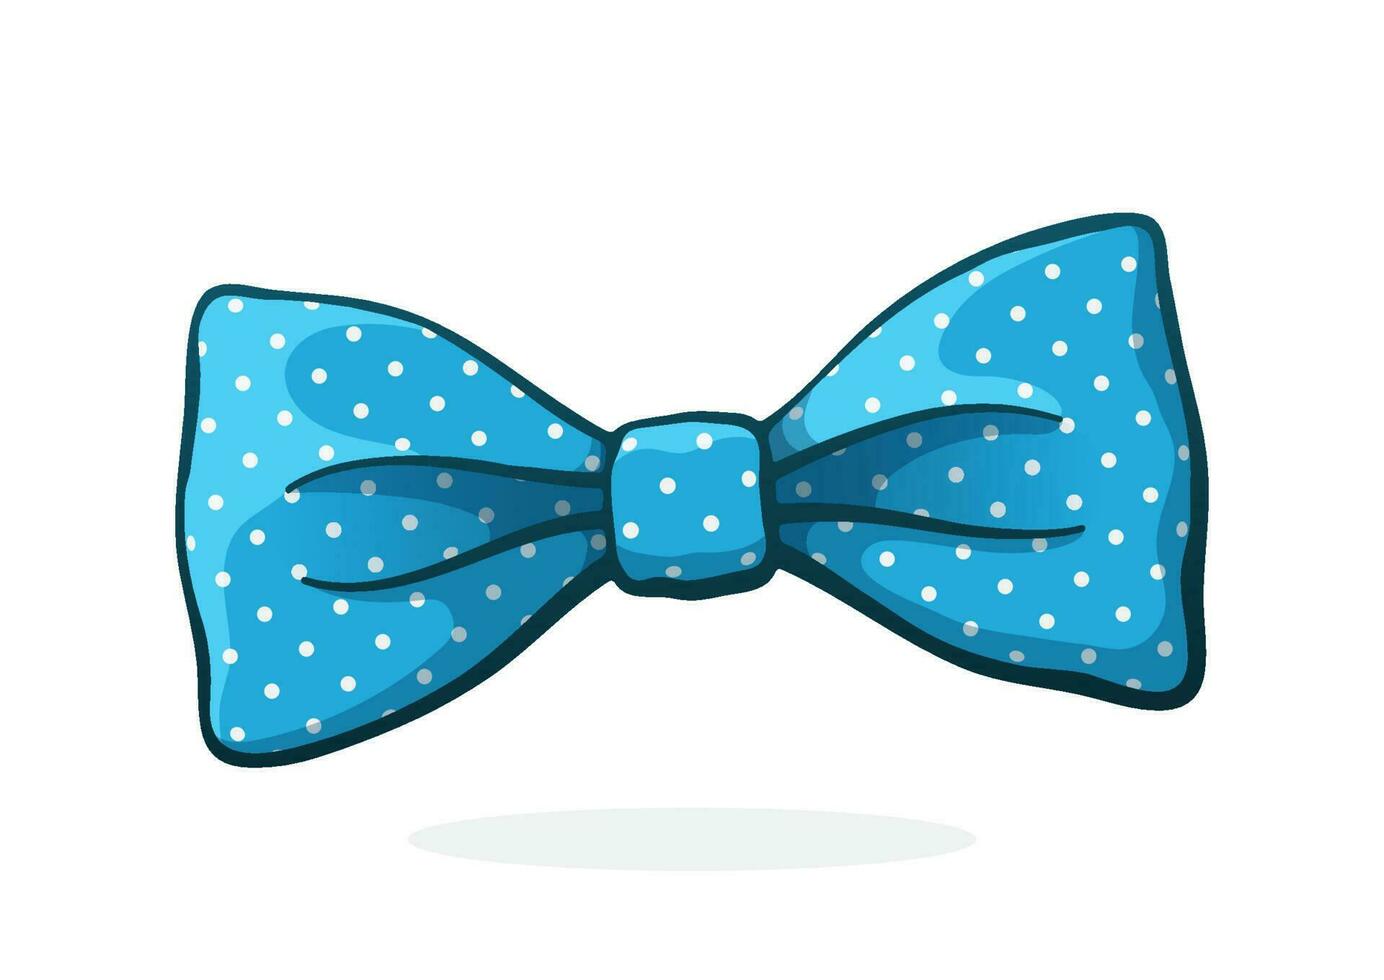 Blue bow tie with print a polka dots.  Hand drawn print with contour. Vintage elegant bowtie. Men's clothing accessories vector